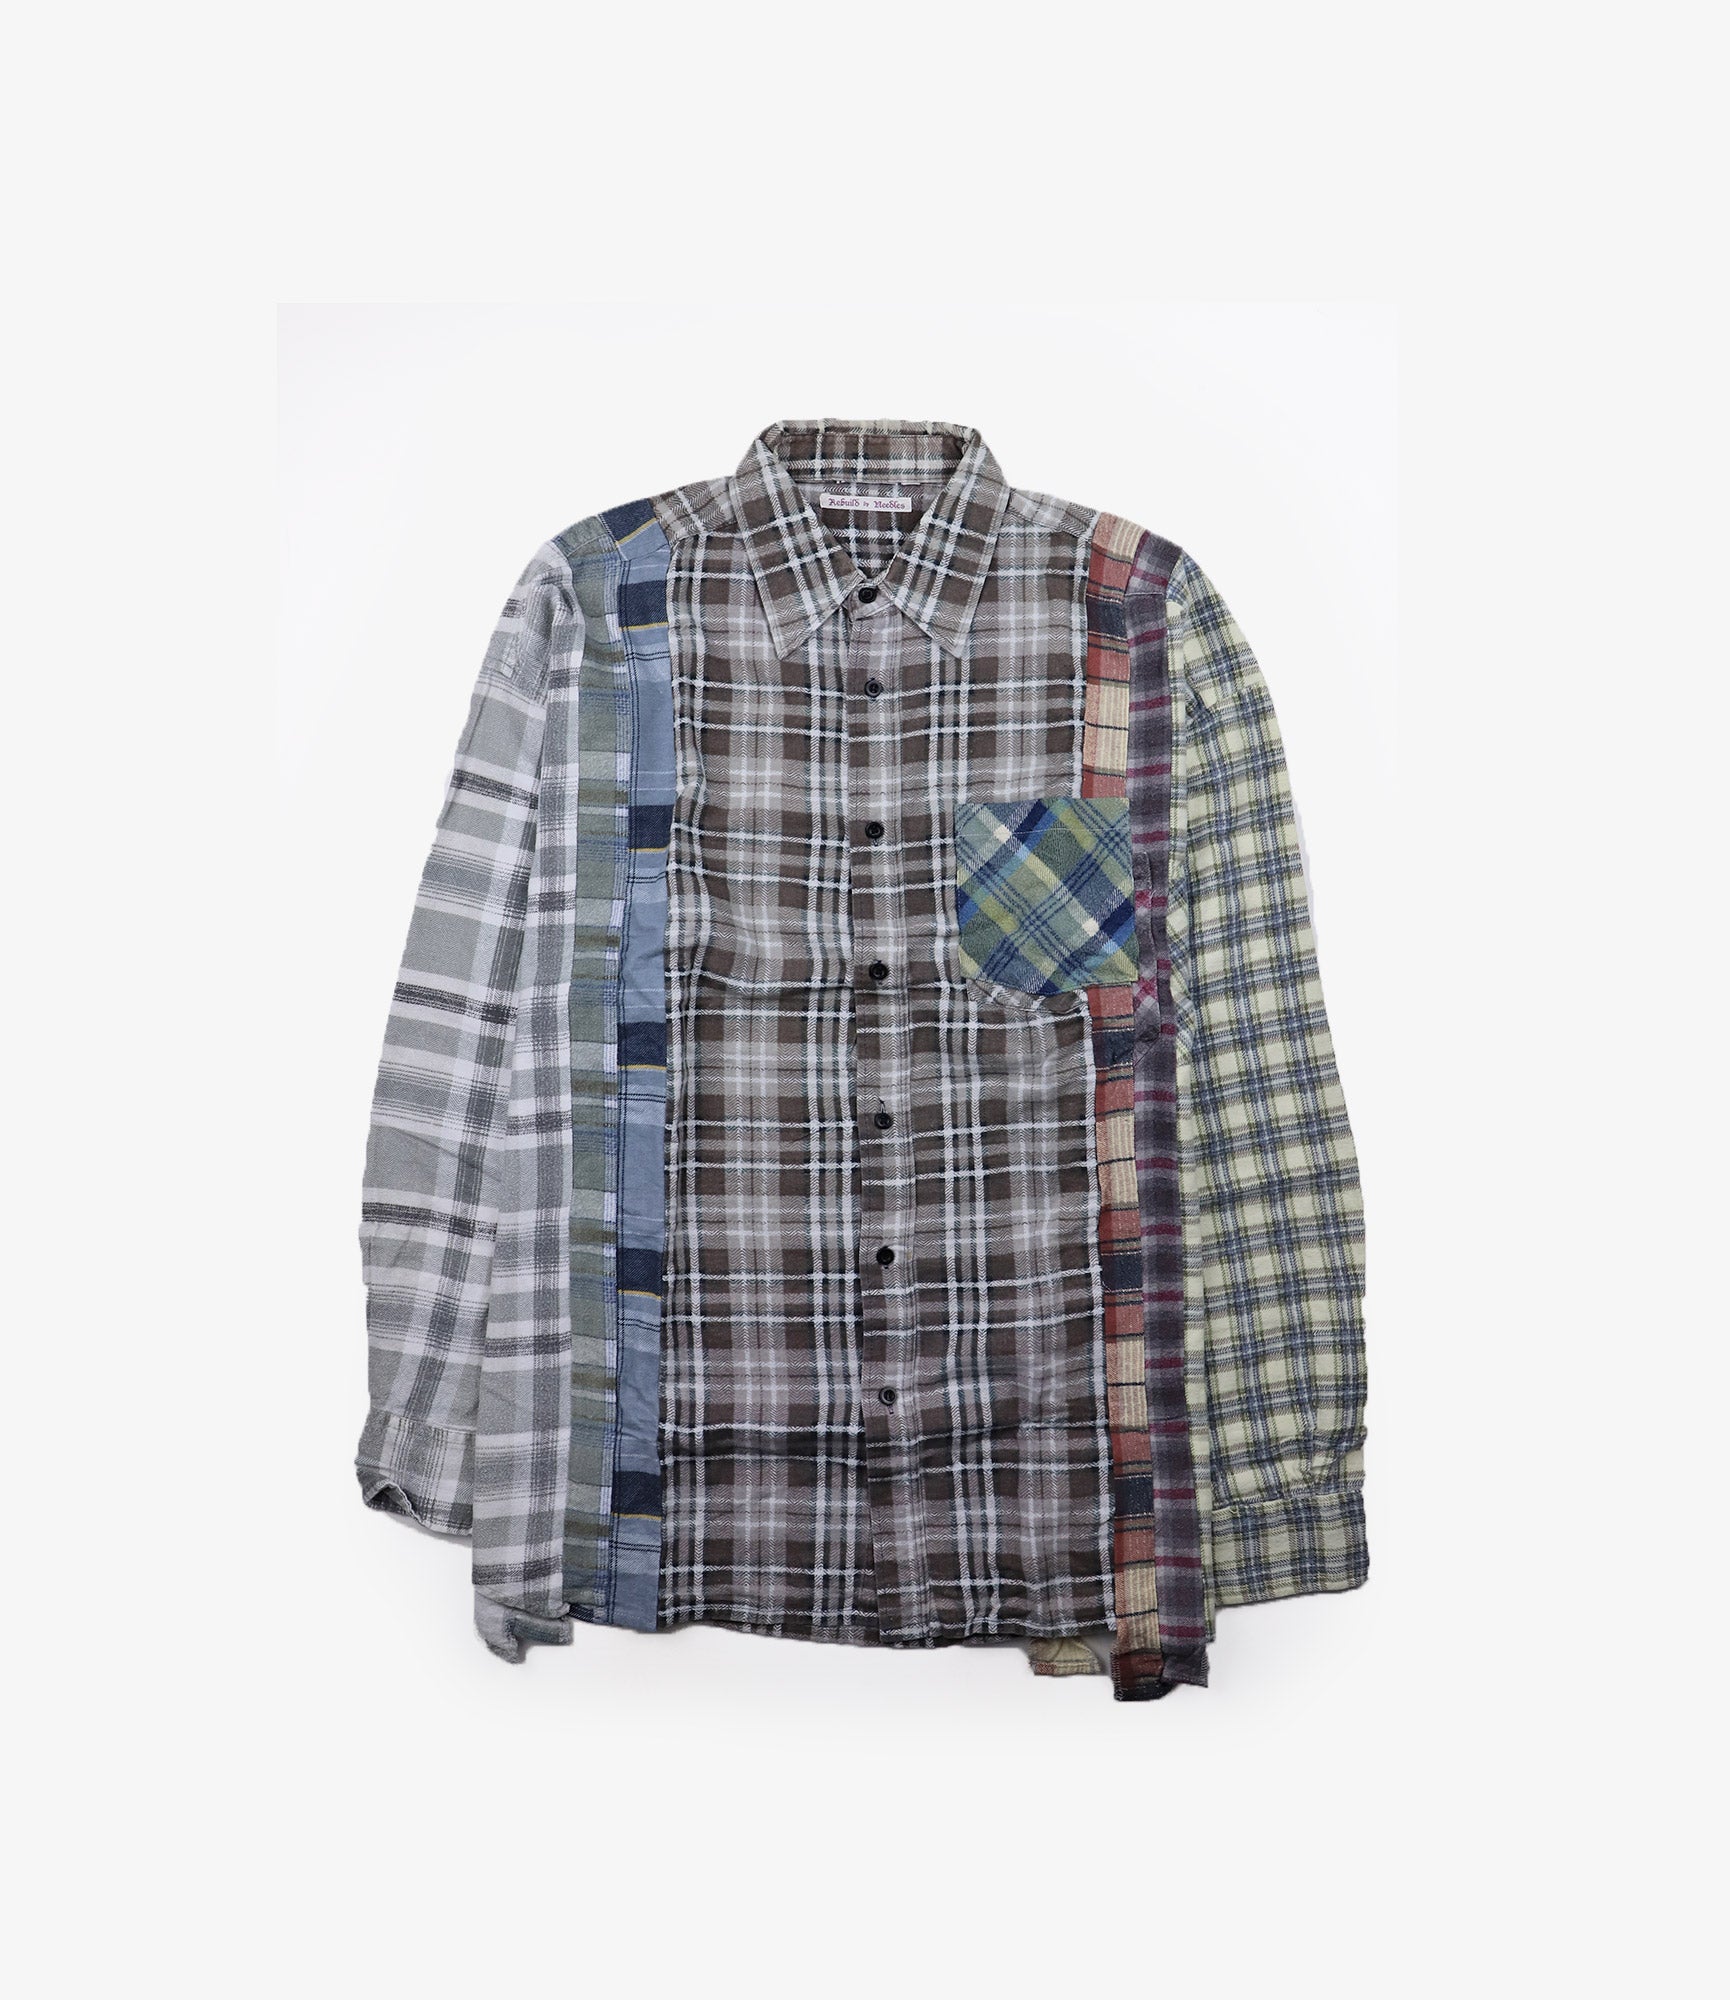 Rebuild by Needles Flannel Shirt - 7 Cuts Wide Shirt